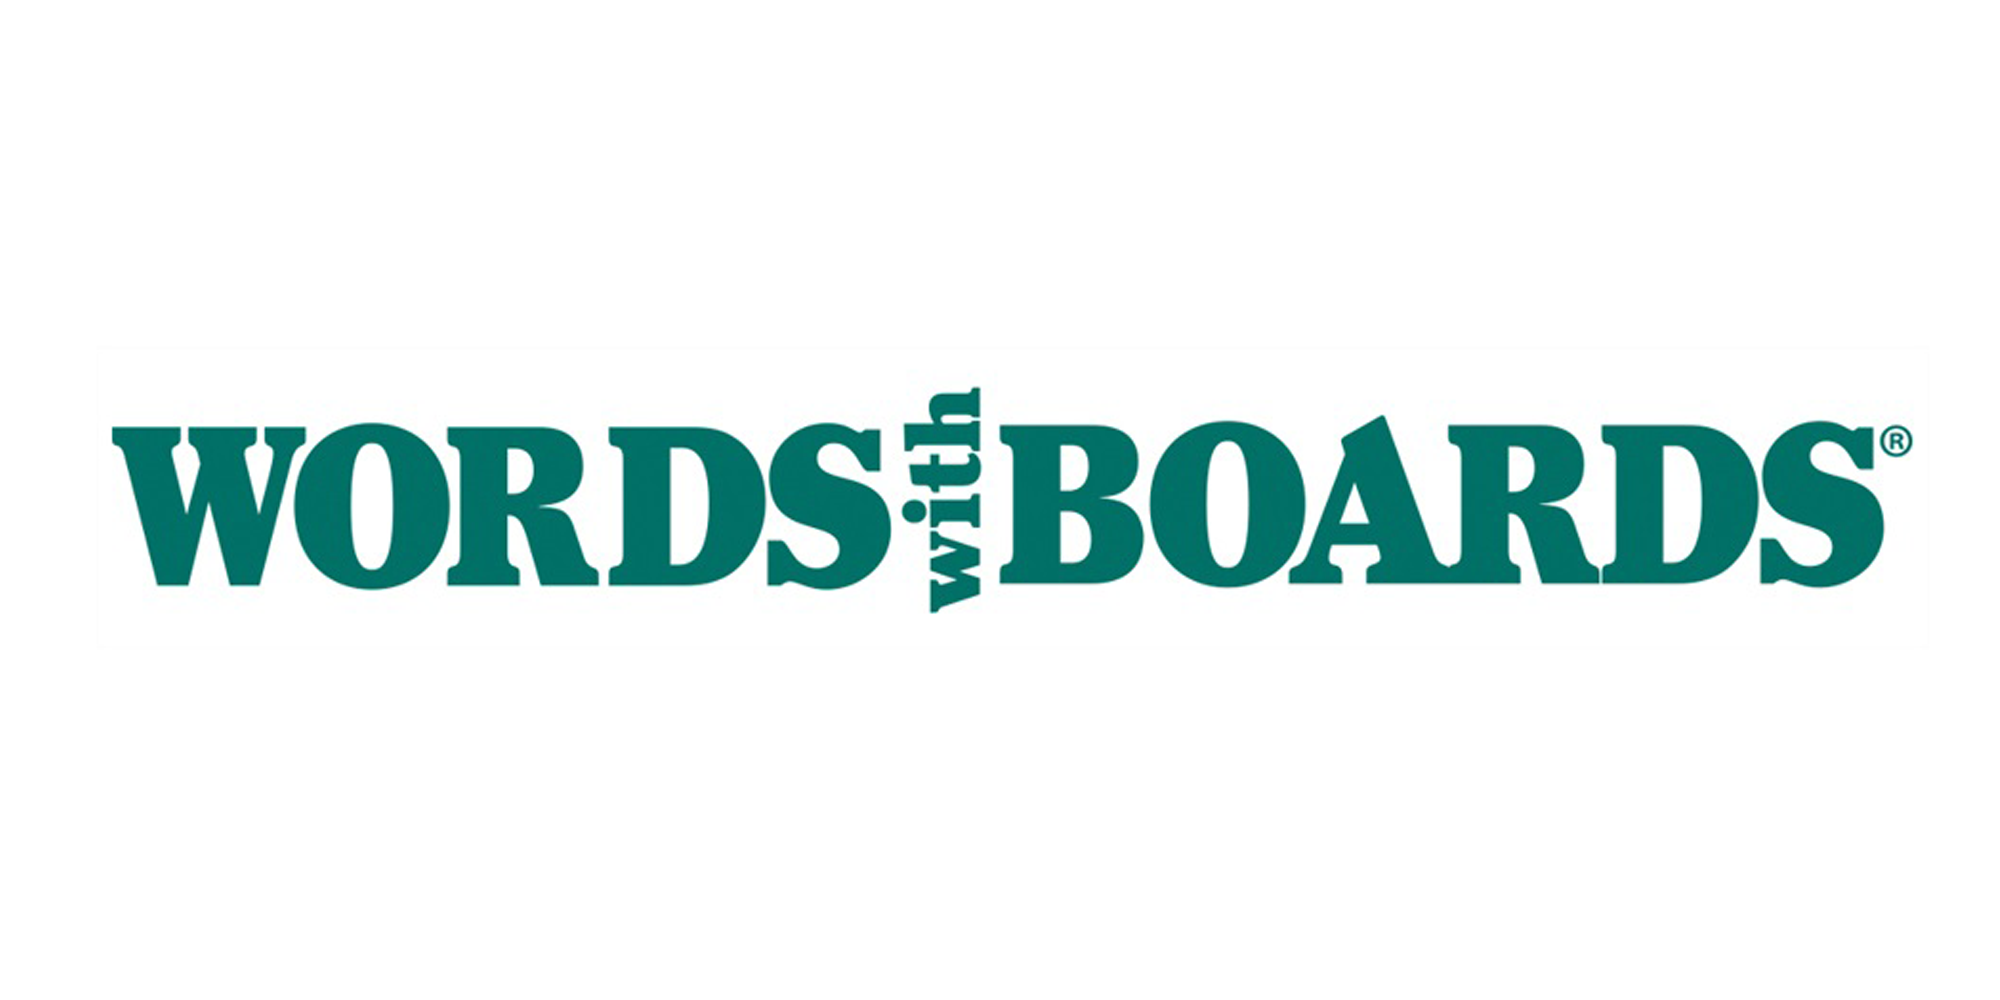 Words With Boards logo